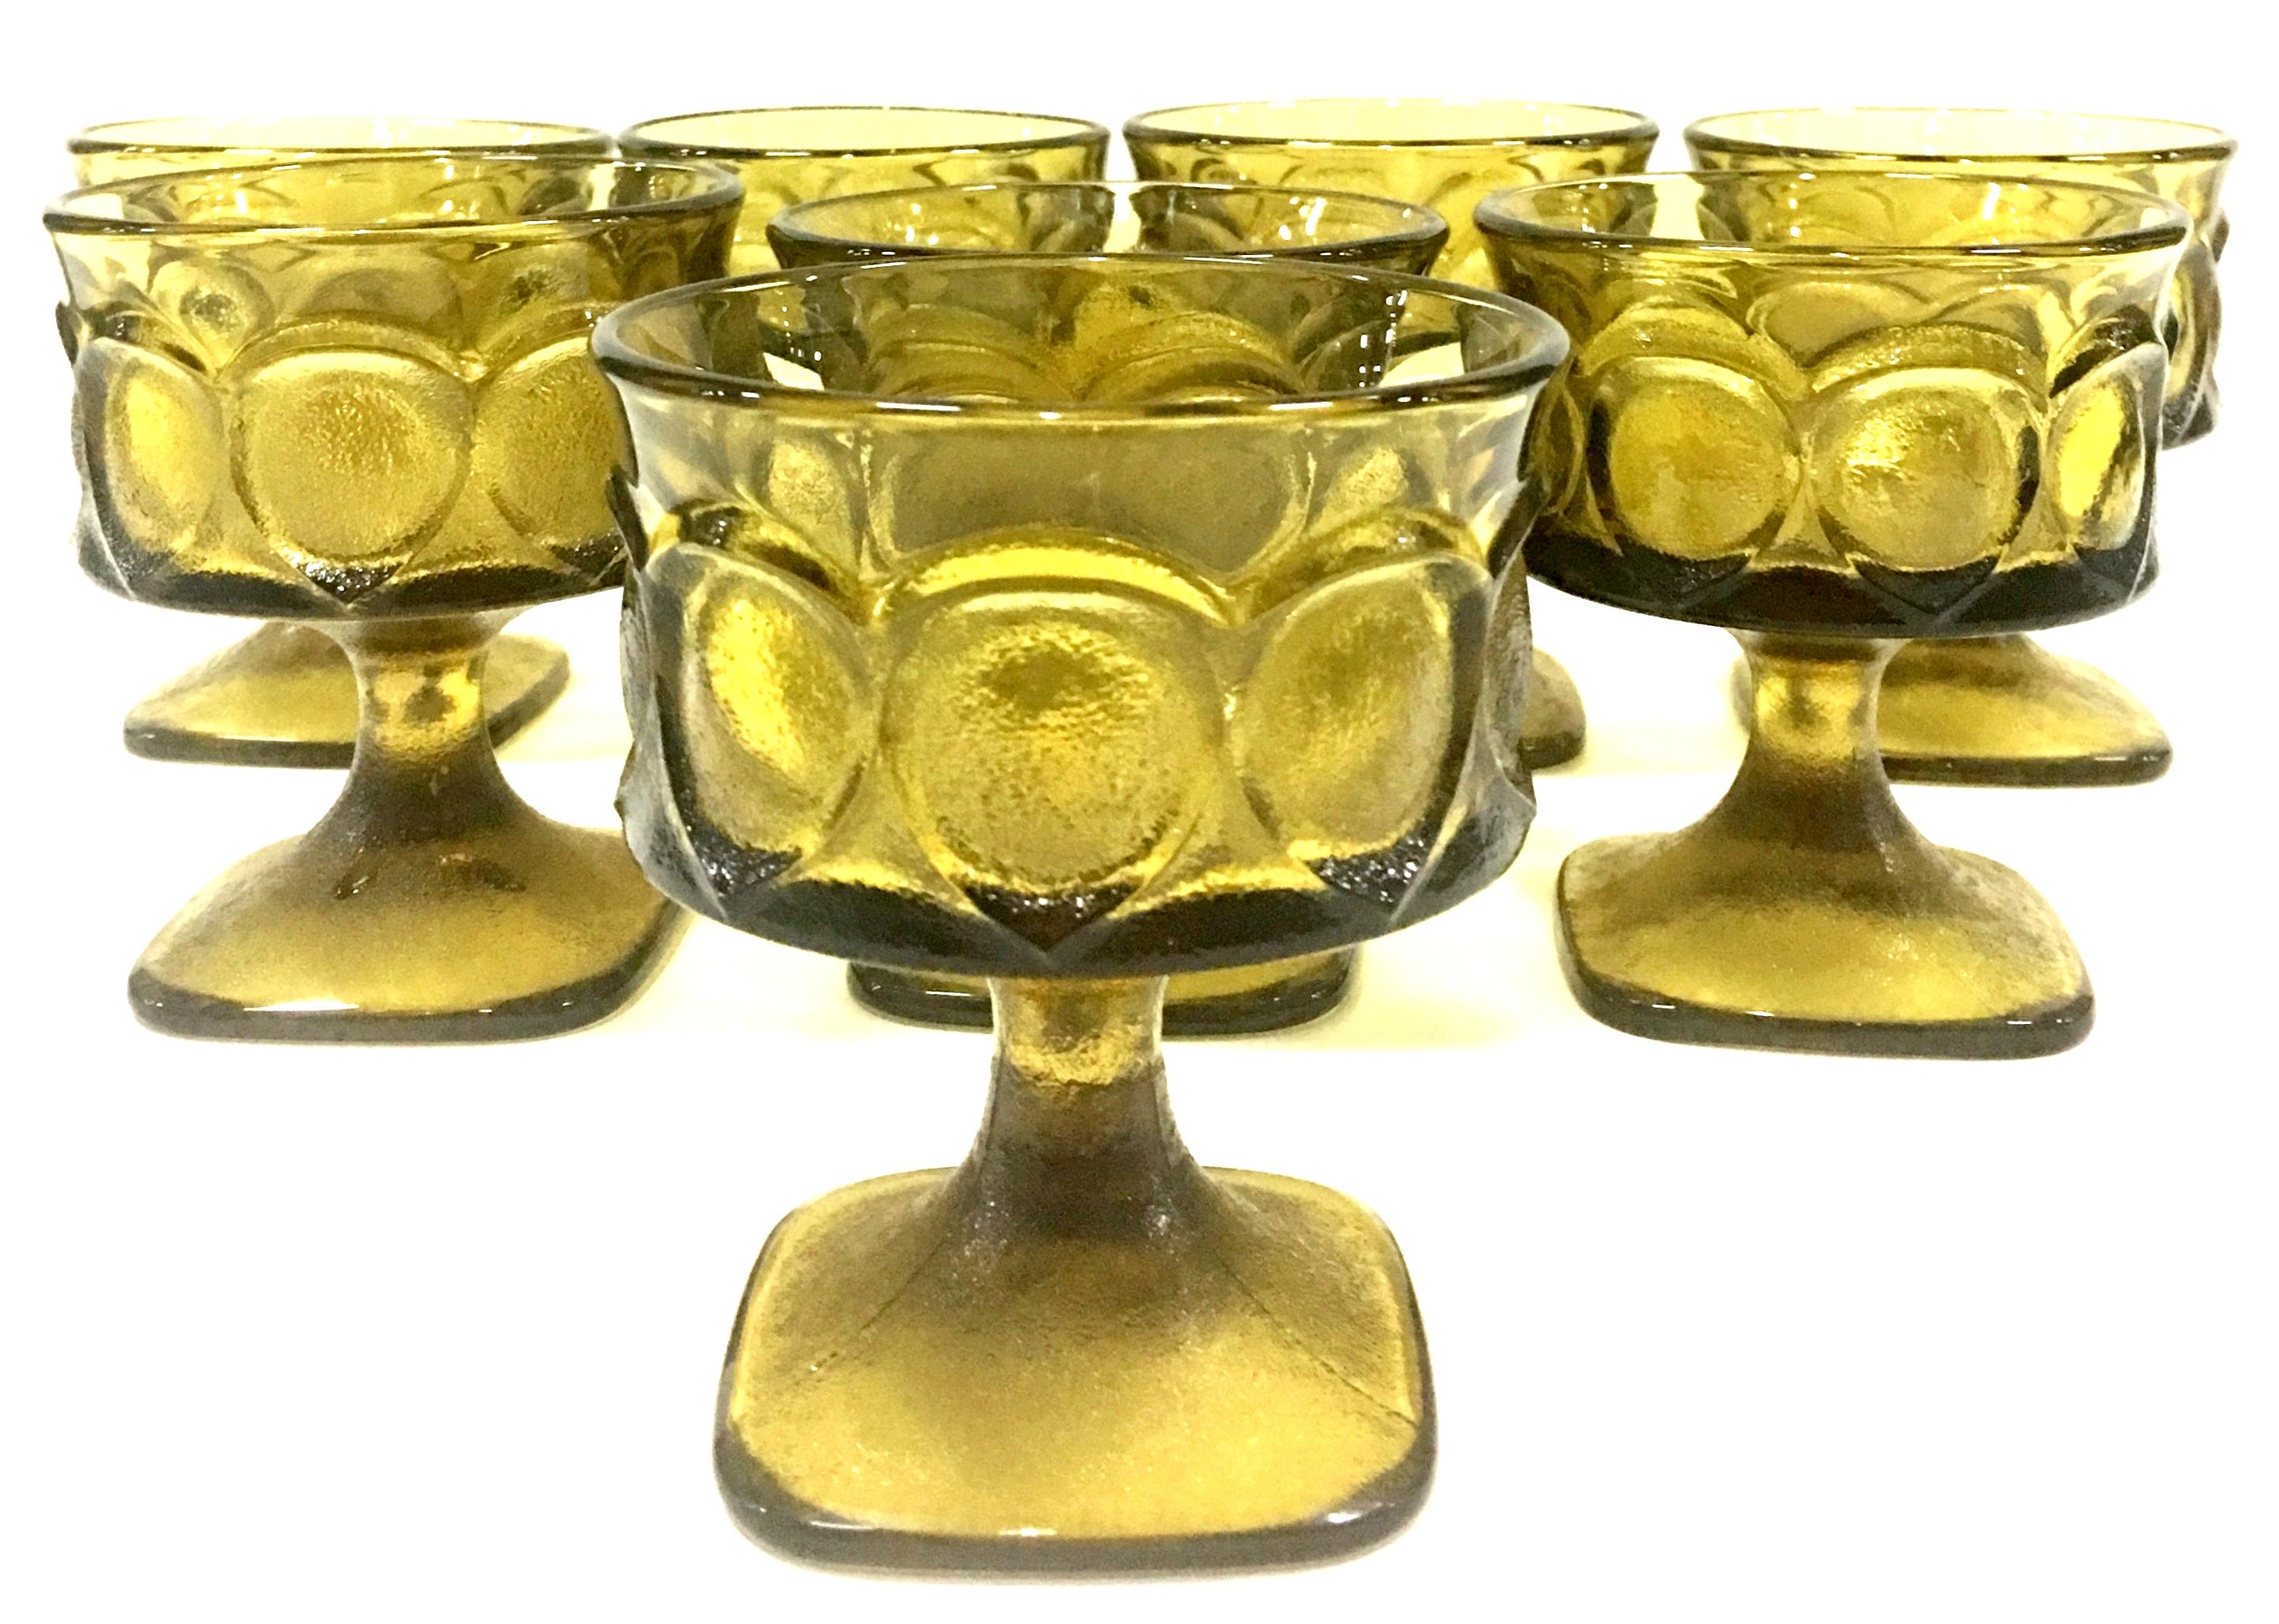 Mid-20th century American blown glass textured olive green coupe stem drink glasses, set of 7 pieces.